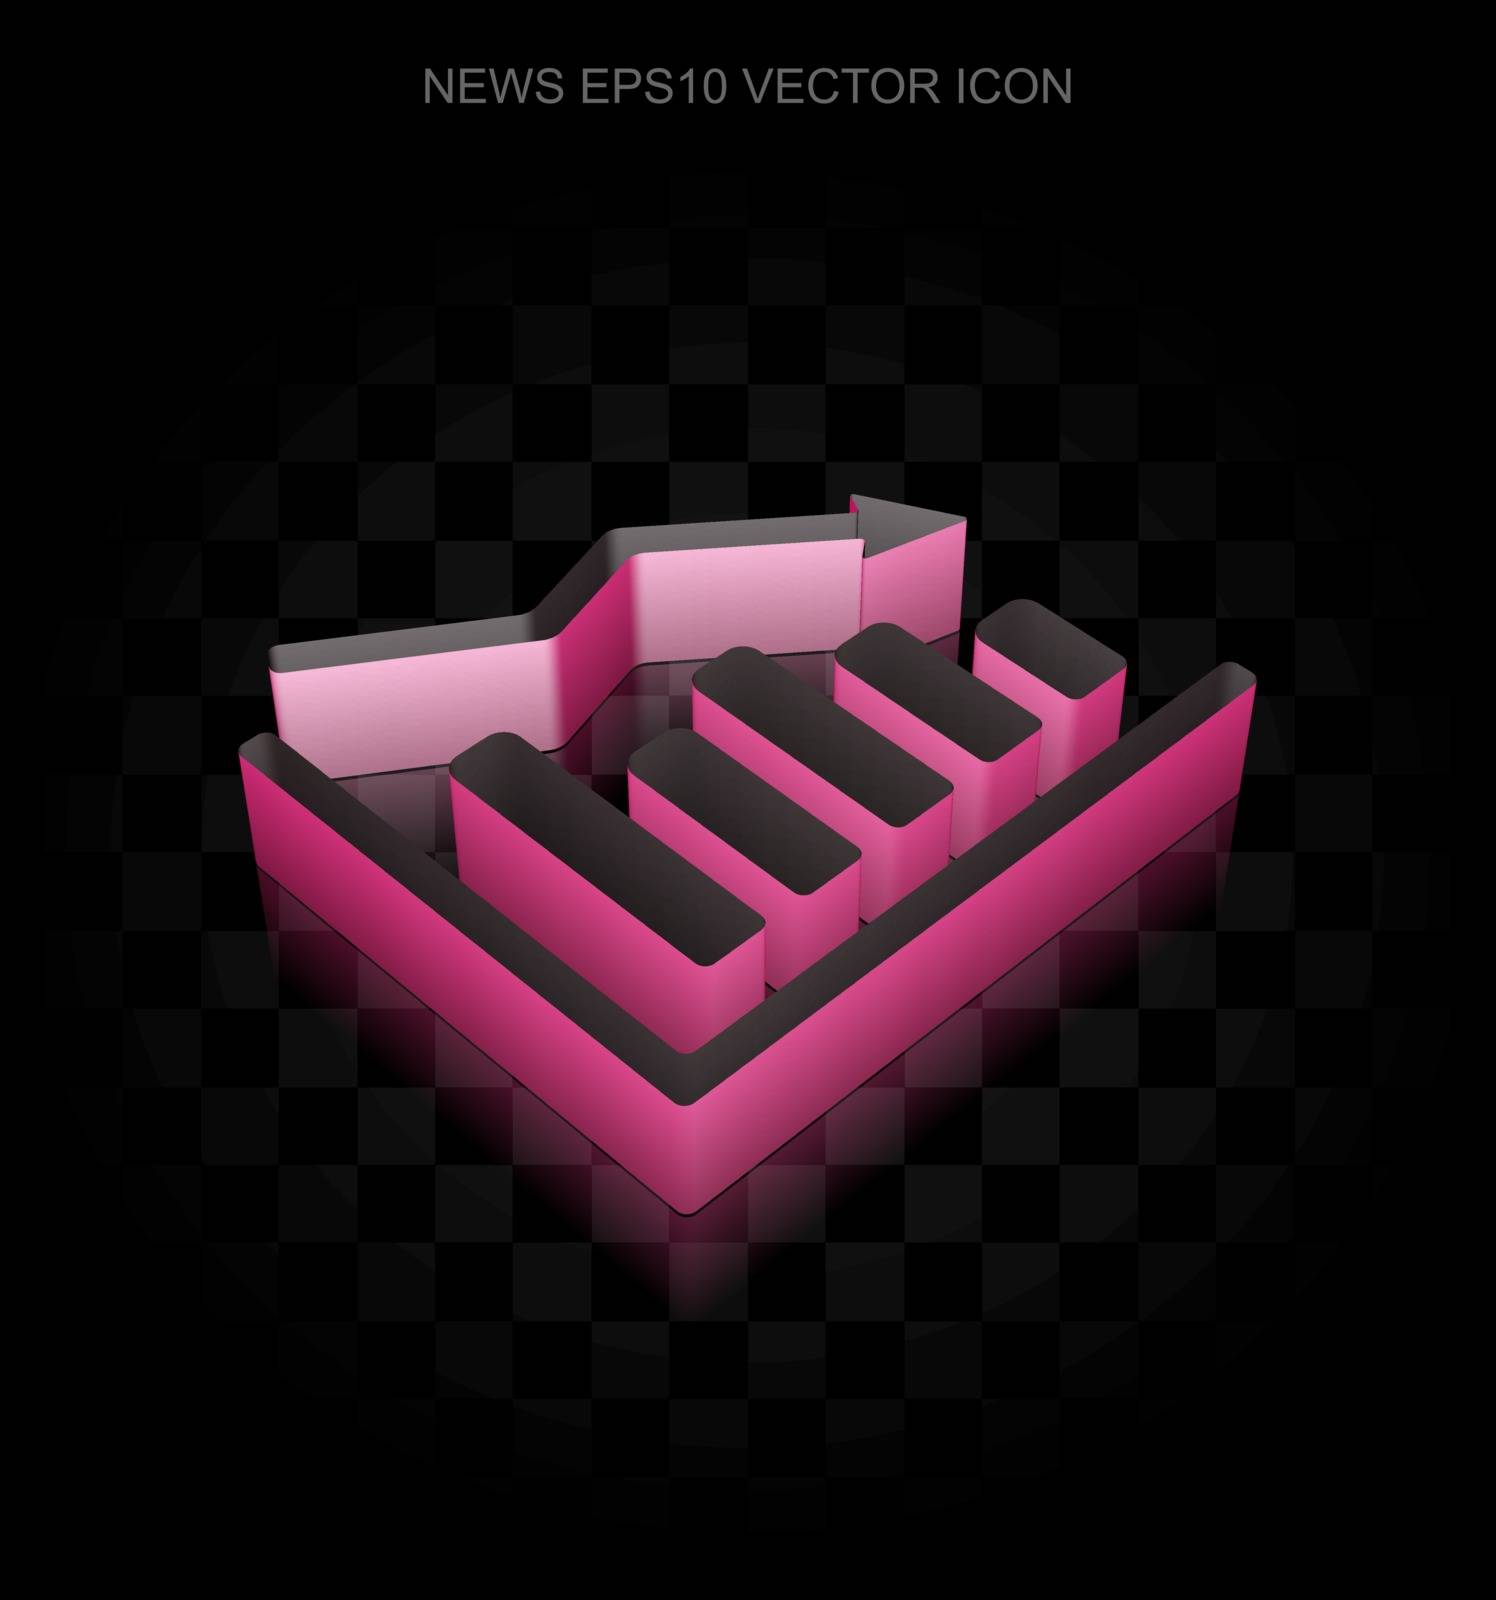 News icon: Crimson 3d Decline Graph made of paper, transparent shadow, EPS 10 vector. by maxkabakov